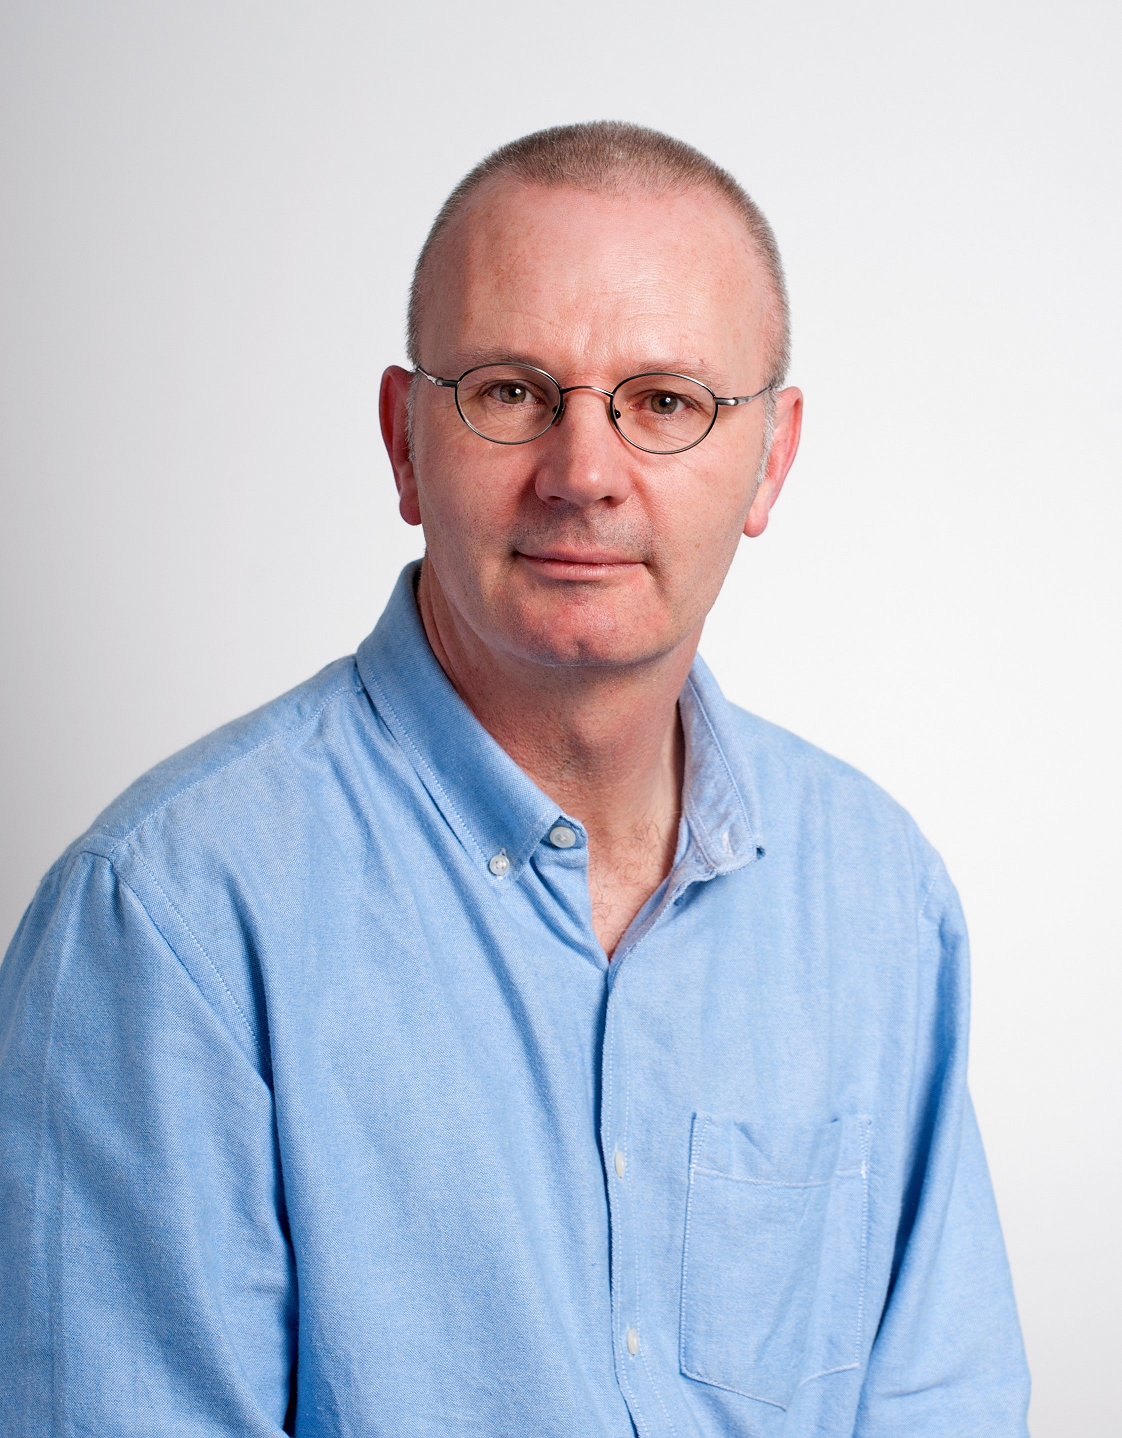 Author photo of Pete Greasley